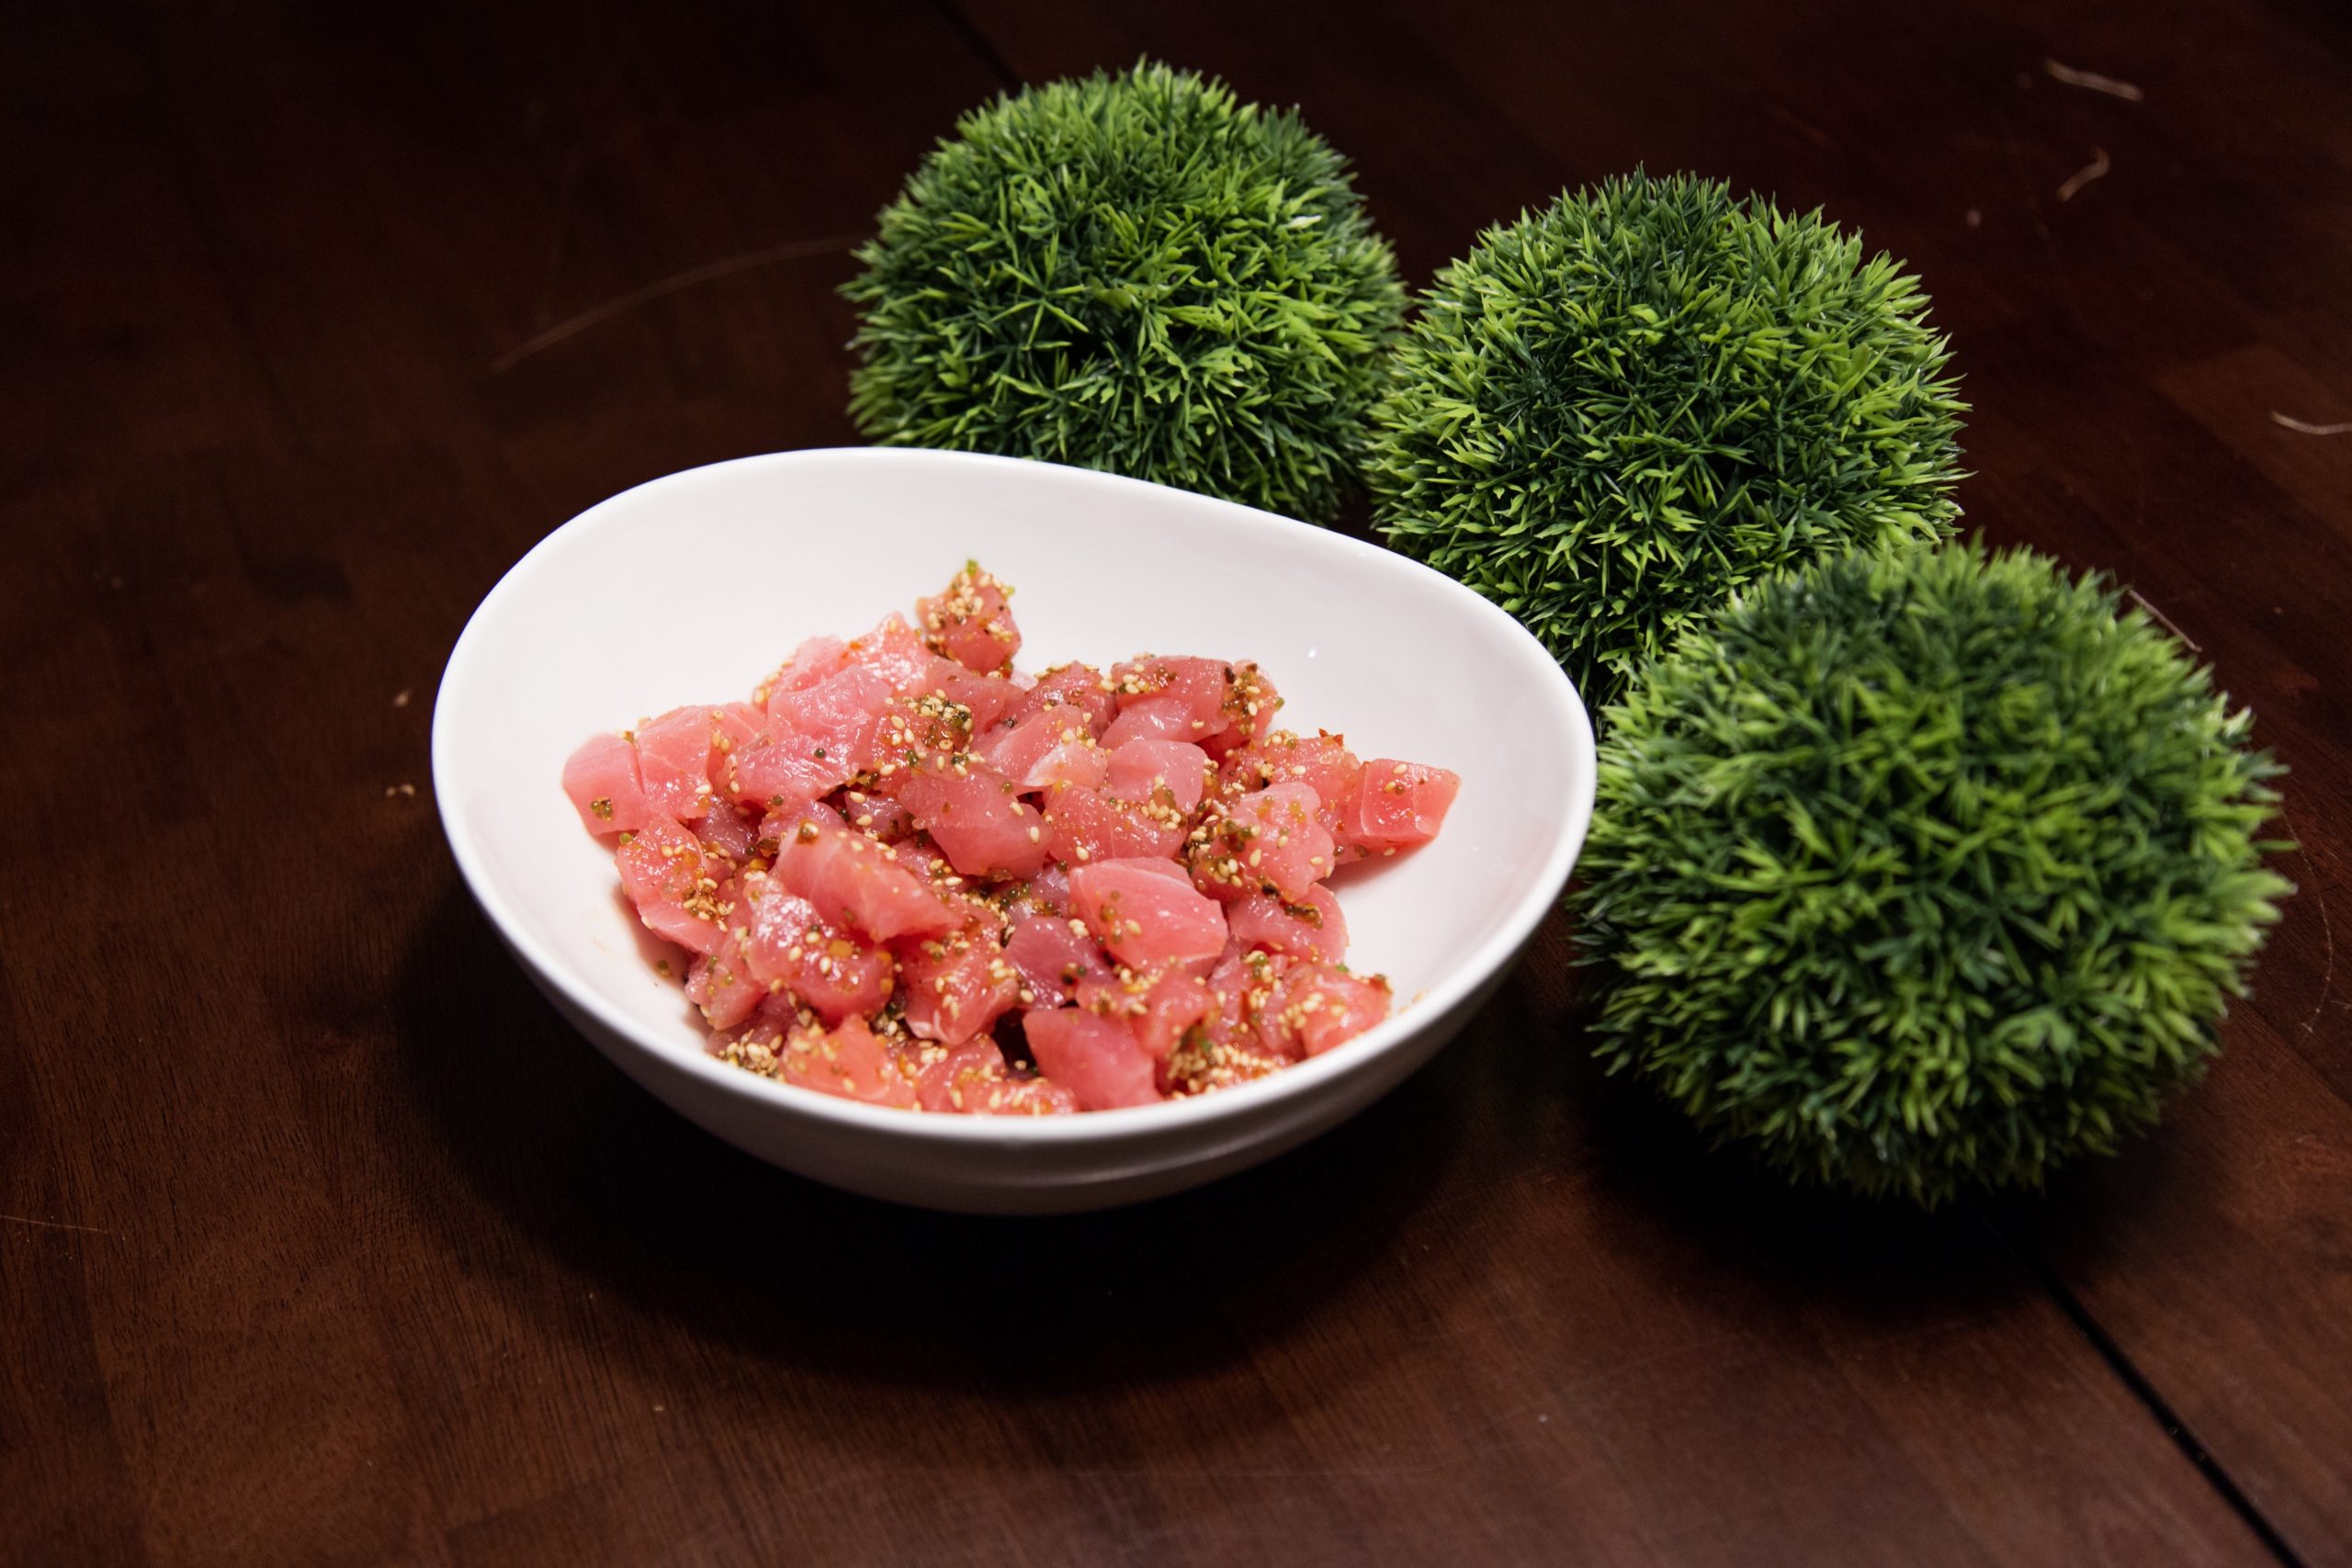 Buy the Best Poke Bowl Kits Online From Us! - Seafood Crate